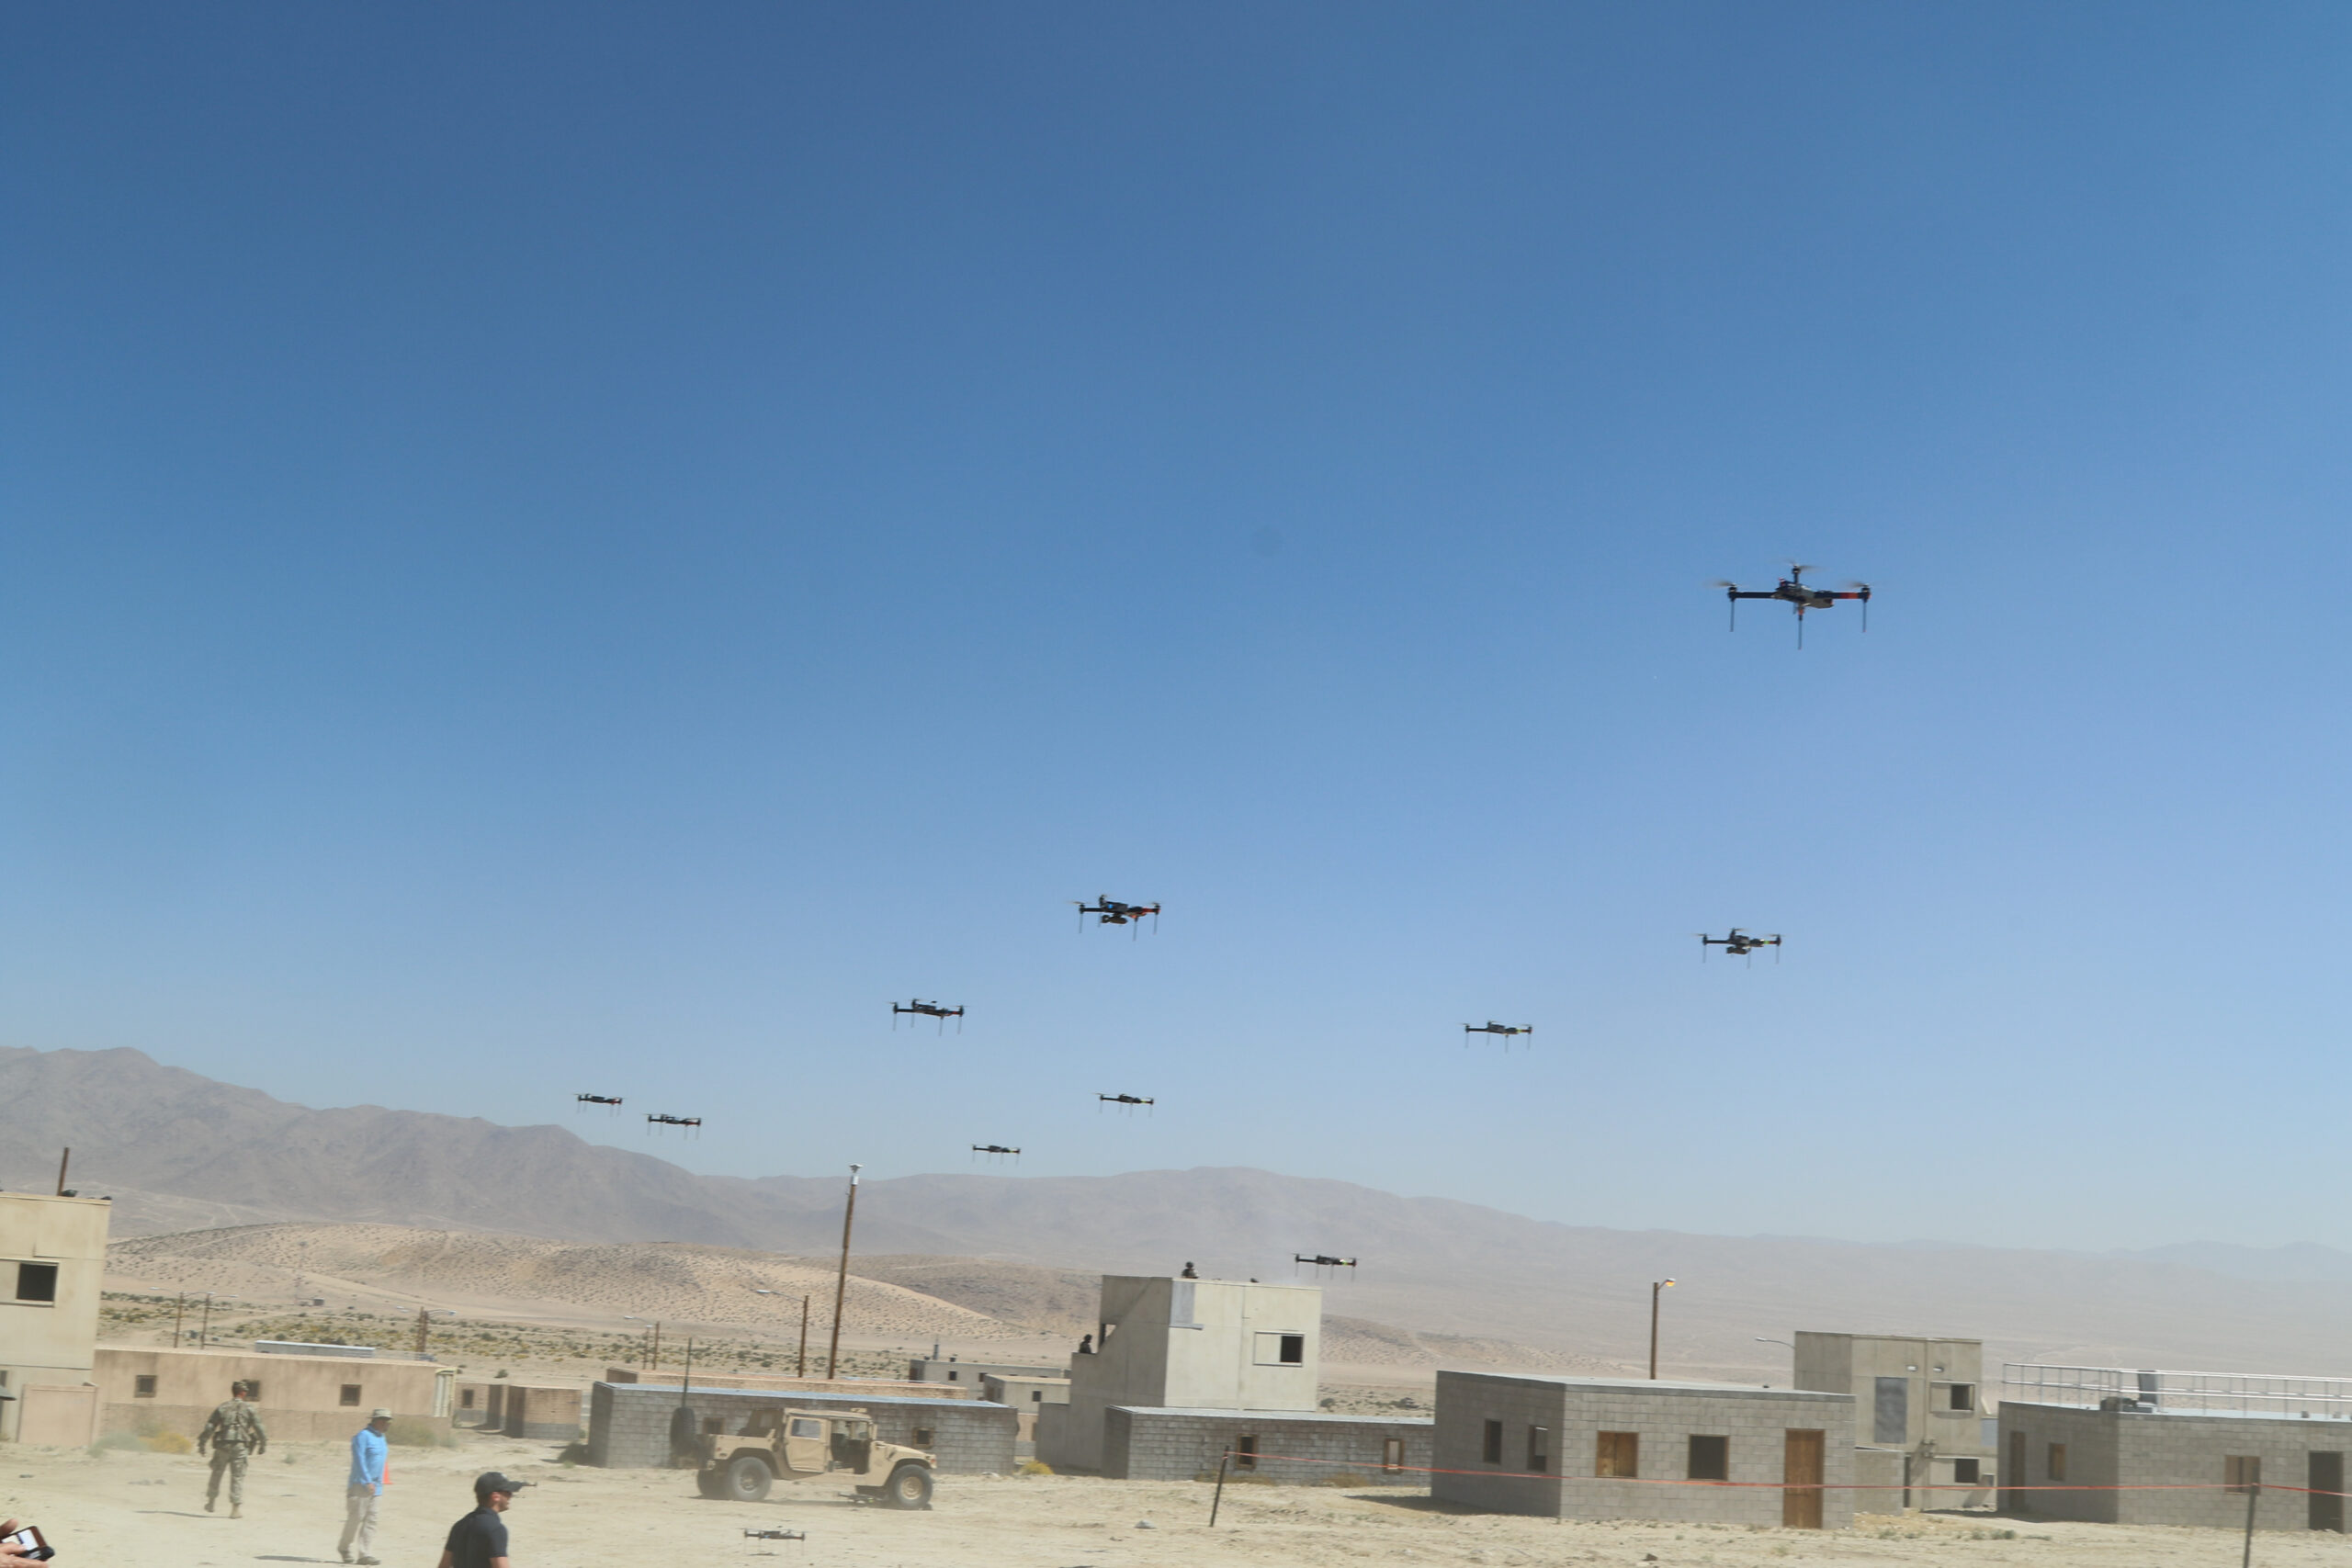 DoD Drone Strategy Focuses On Low-End Threats – Not Nation-States